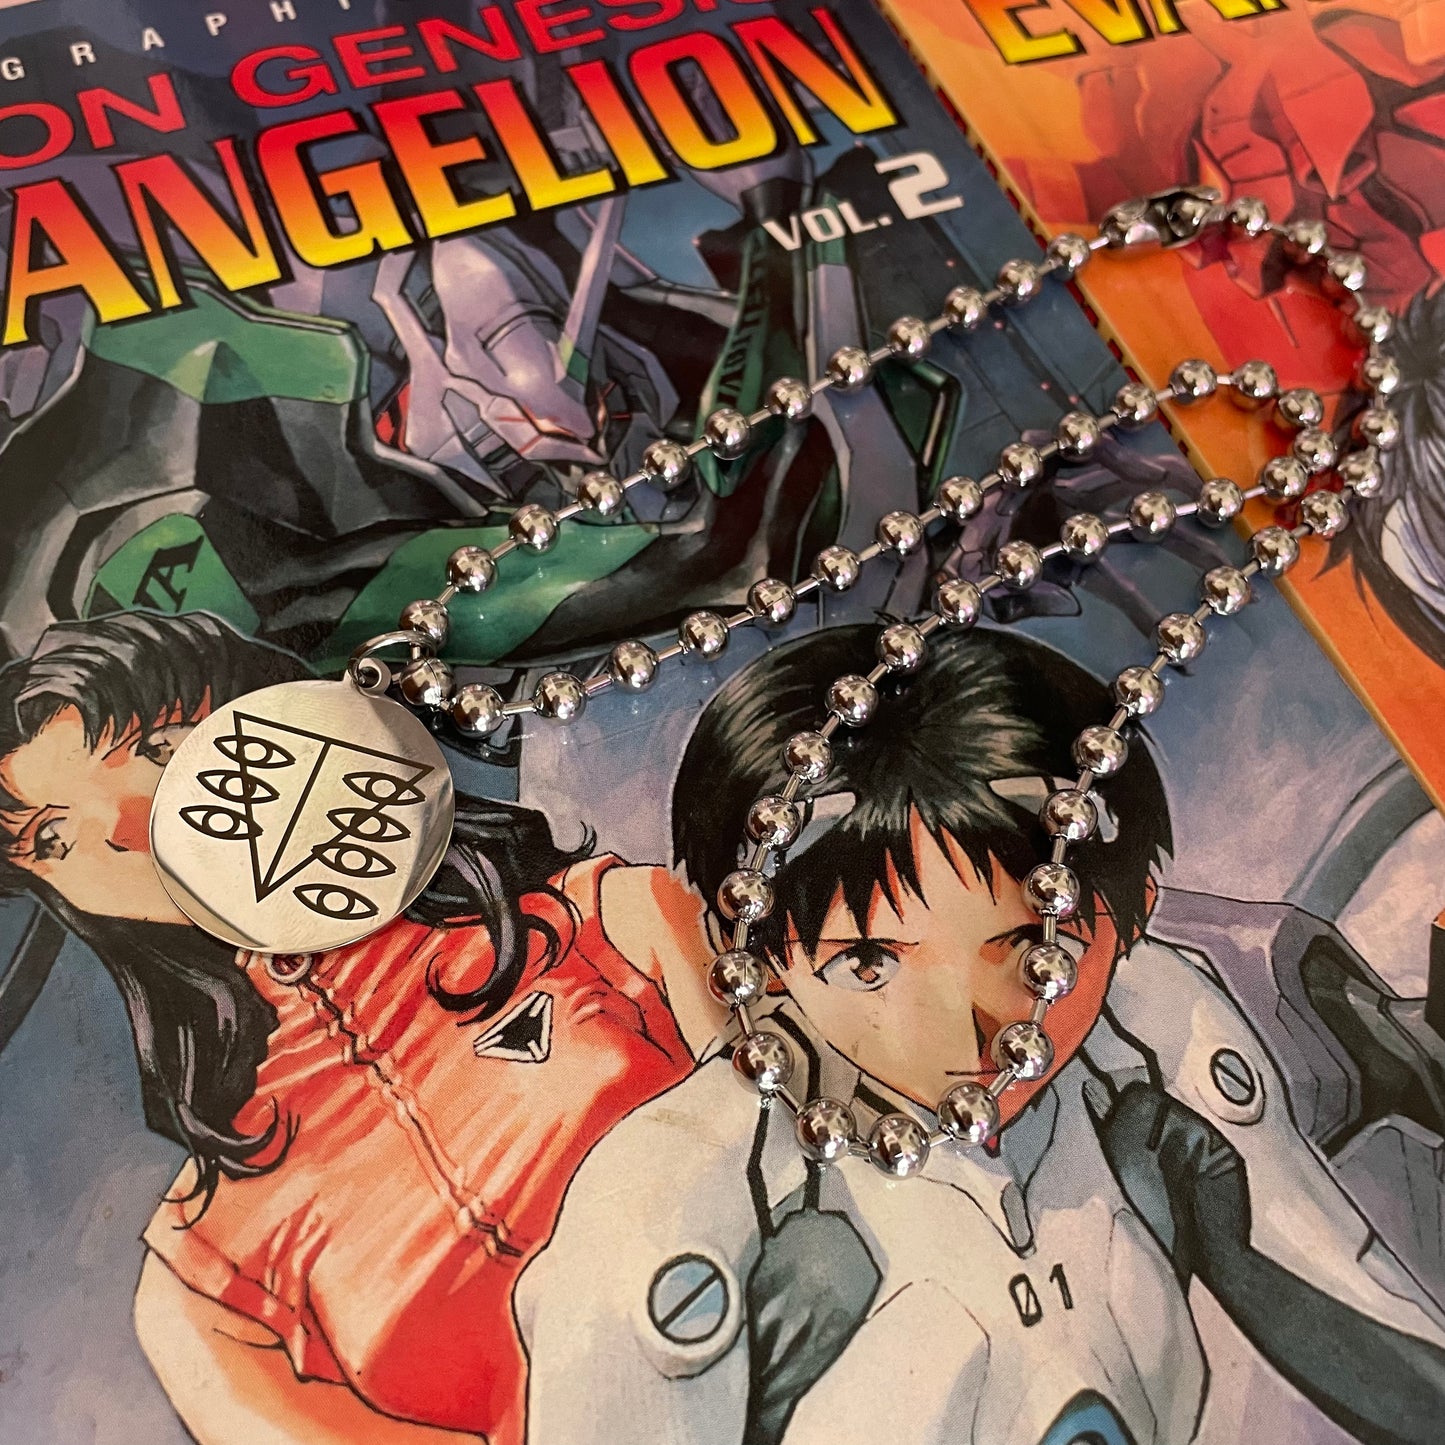 evangelion seele ball chain necklace